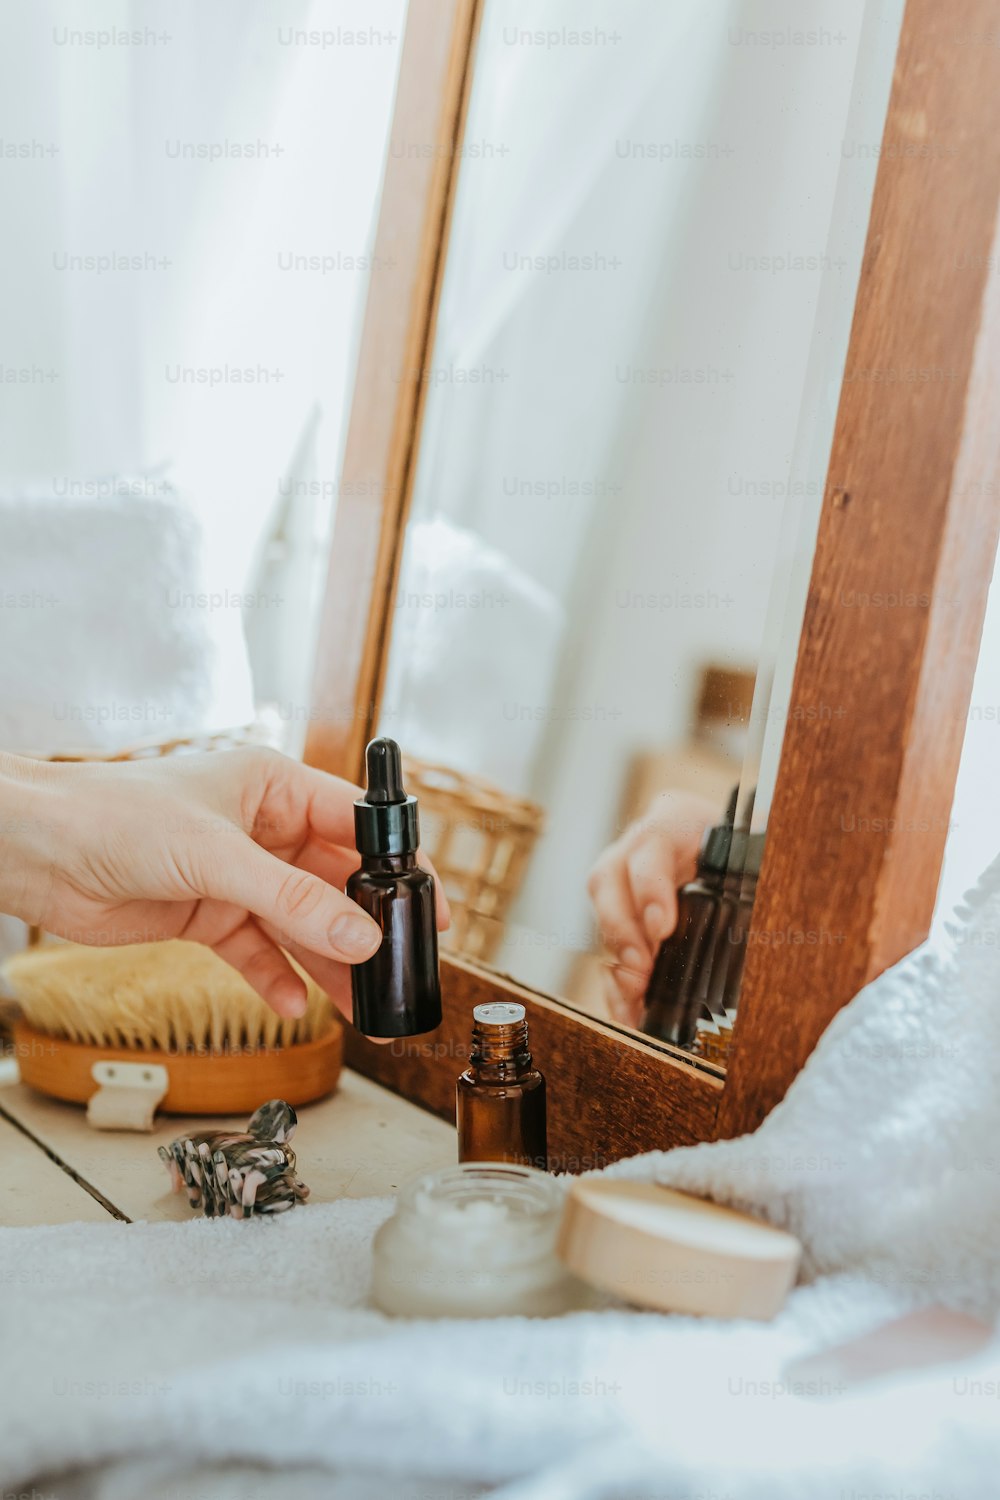 a person holding a bottle of essential oils in front of a mirror